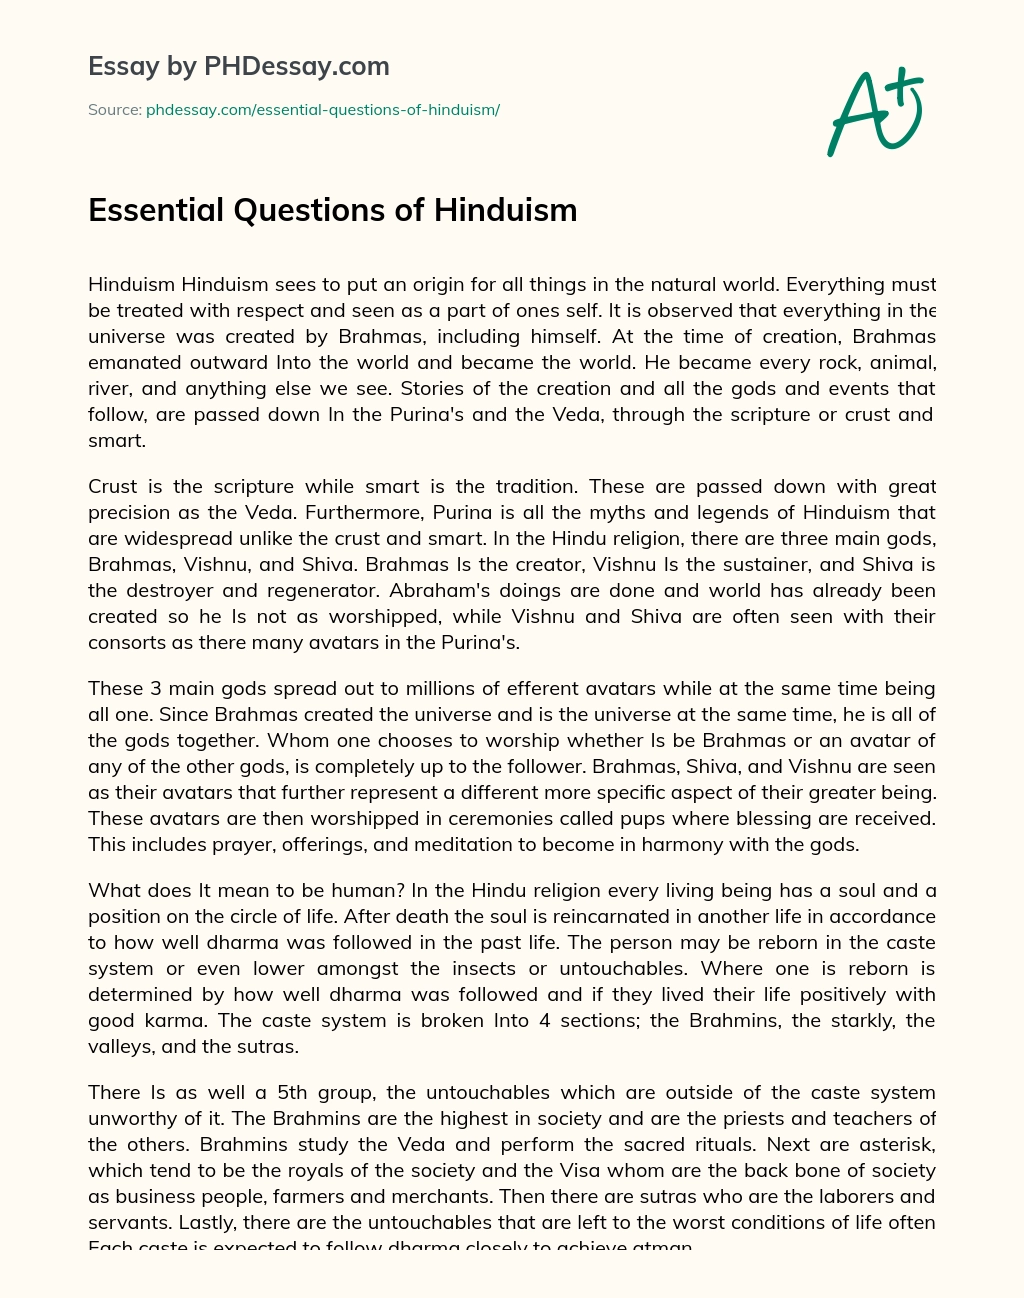 Essential Questions of Hinduism essay